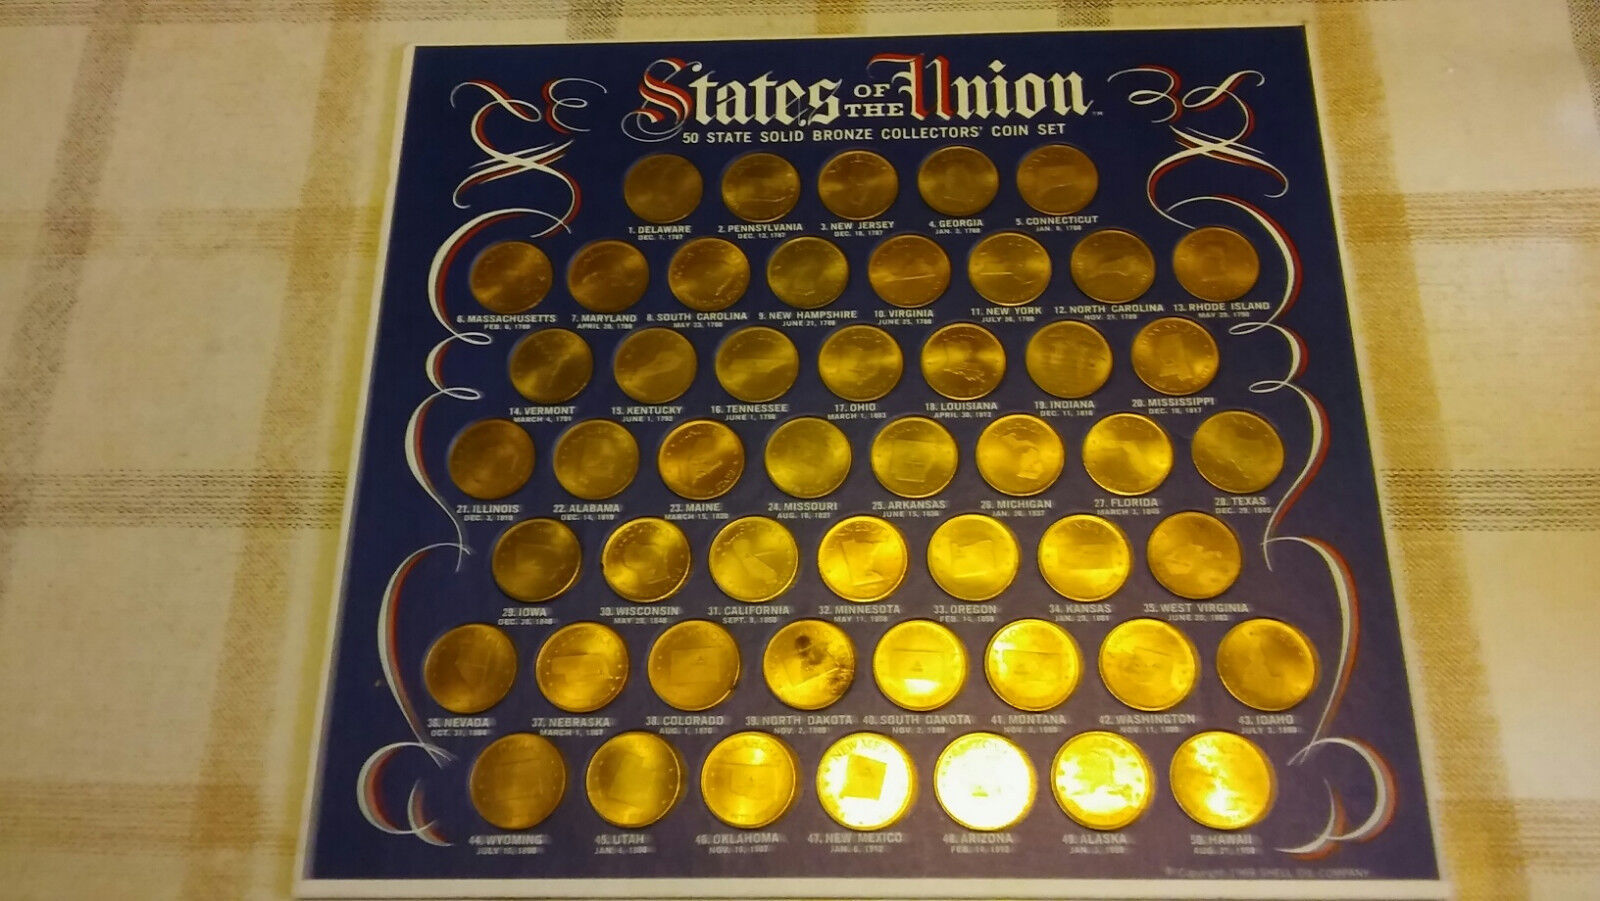 50 State Solid Bronze Collector's Coin Set - Shell Oil Company 1969....